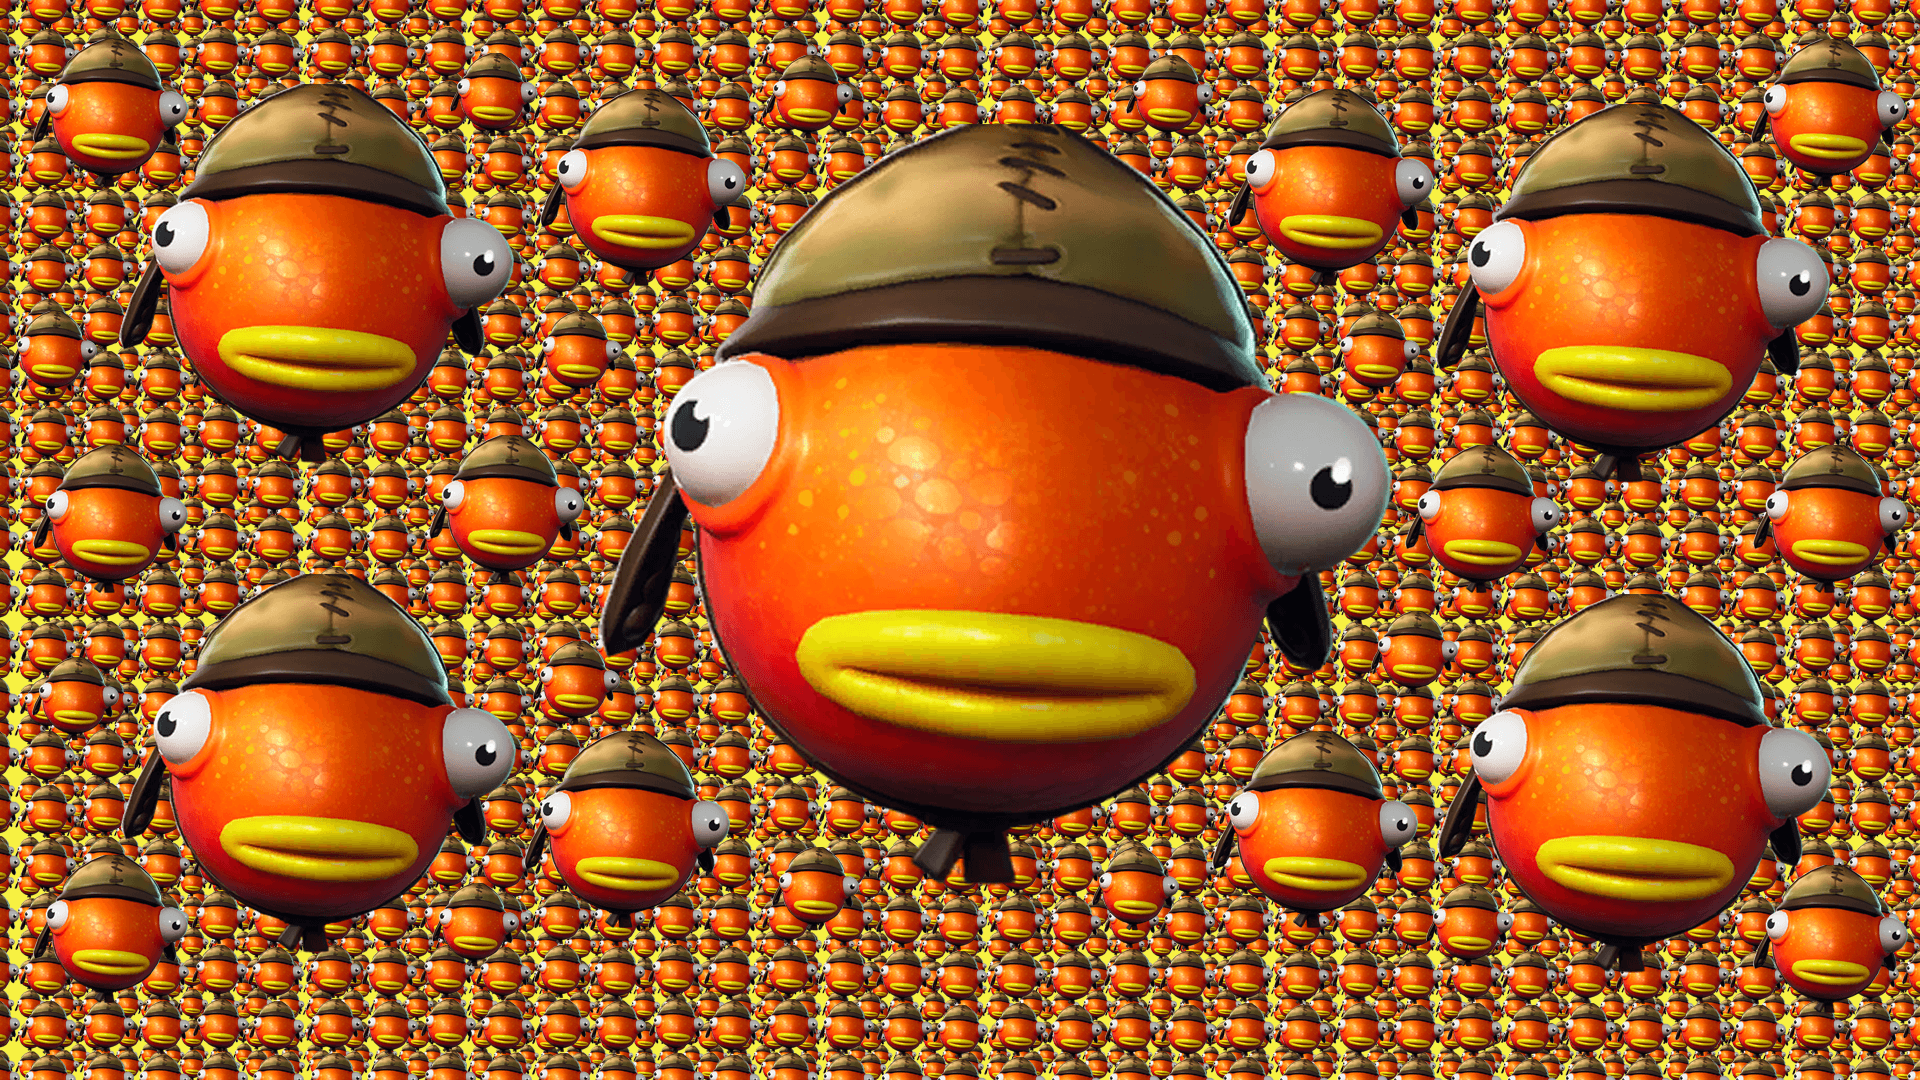 Someone asked for a stupid looking Fishstick wallpaper, and all I